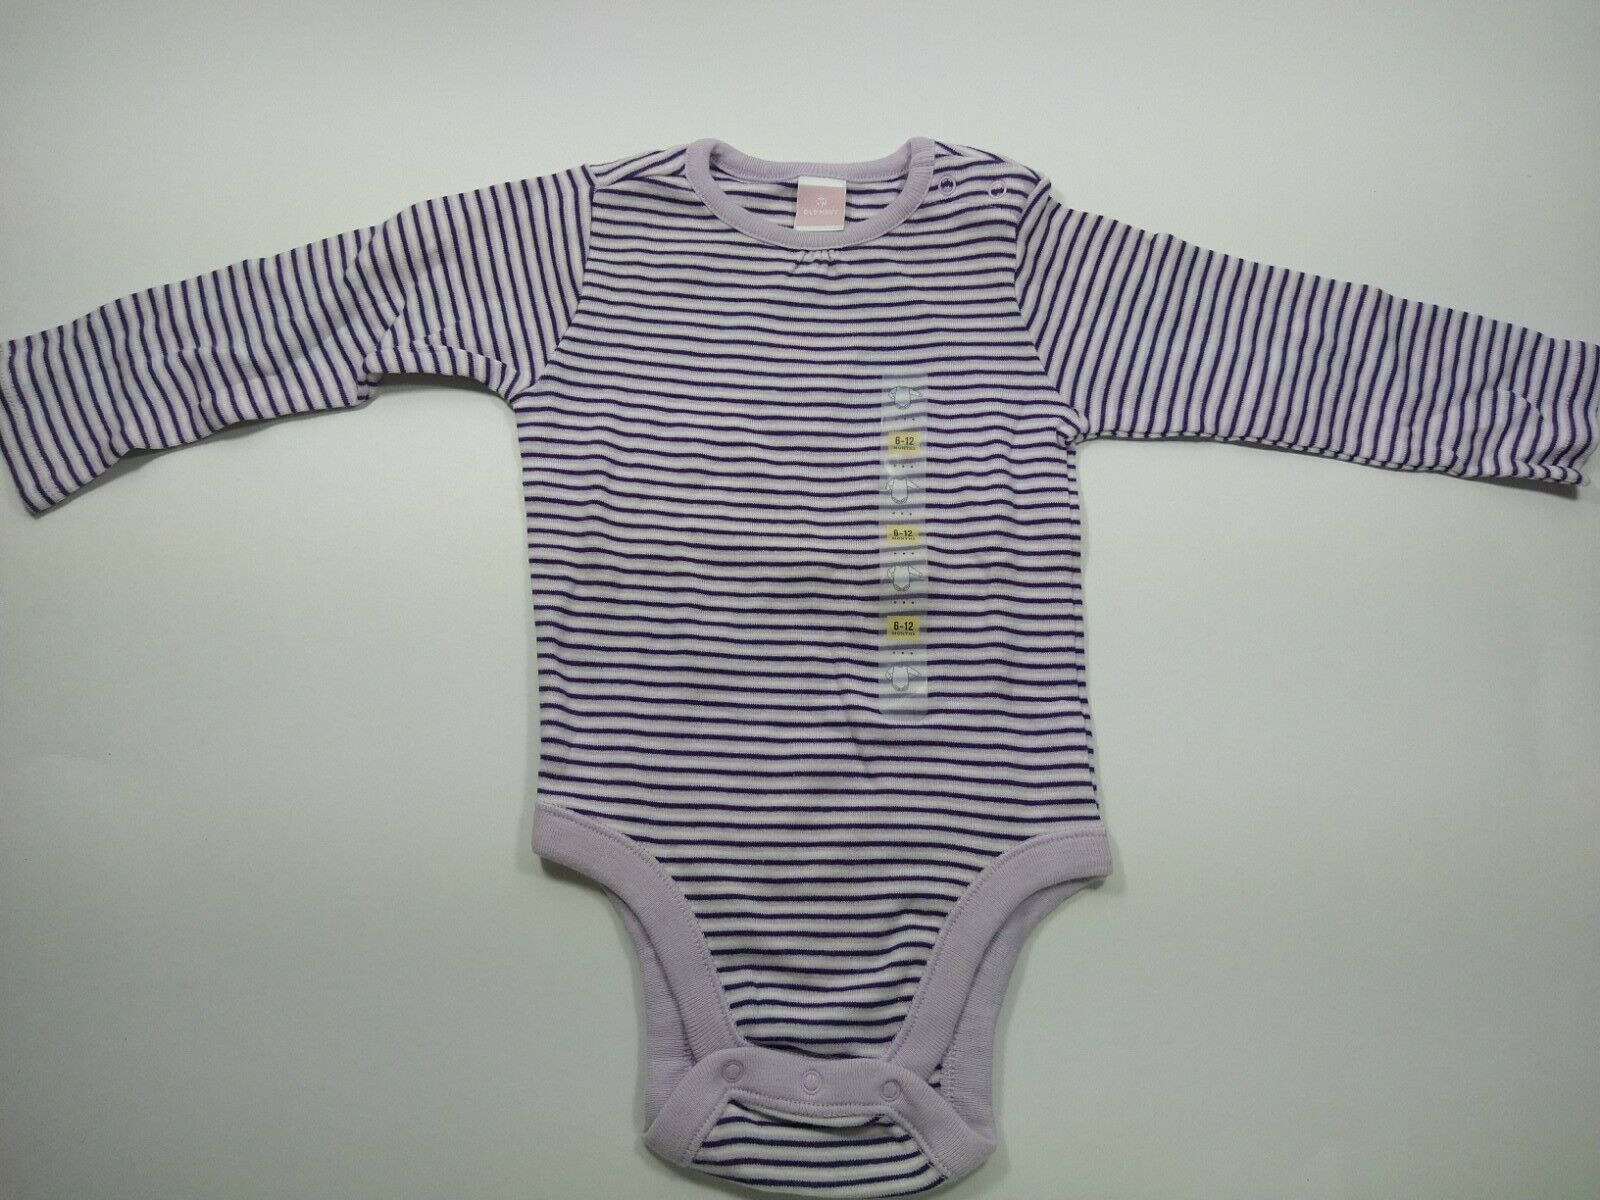 Baby Girl Bodysuit Long Sleeve 6-12 Months Striped Floral Old Navy Lot of 4 - $38.50